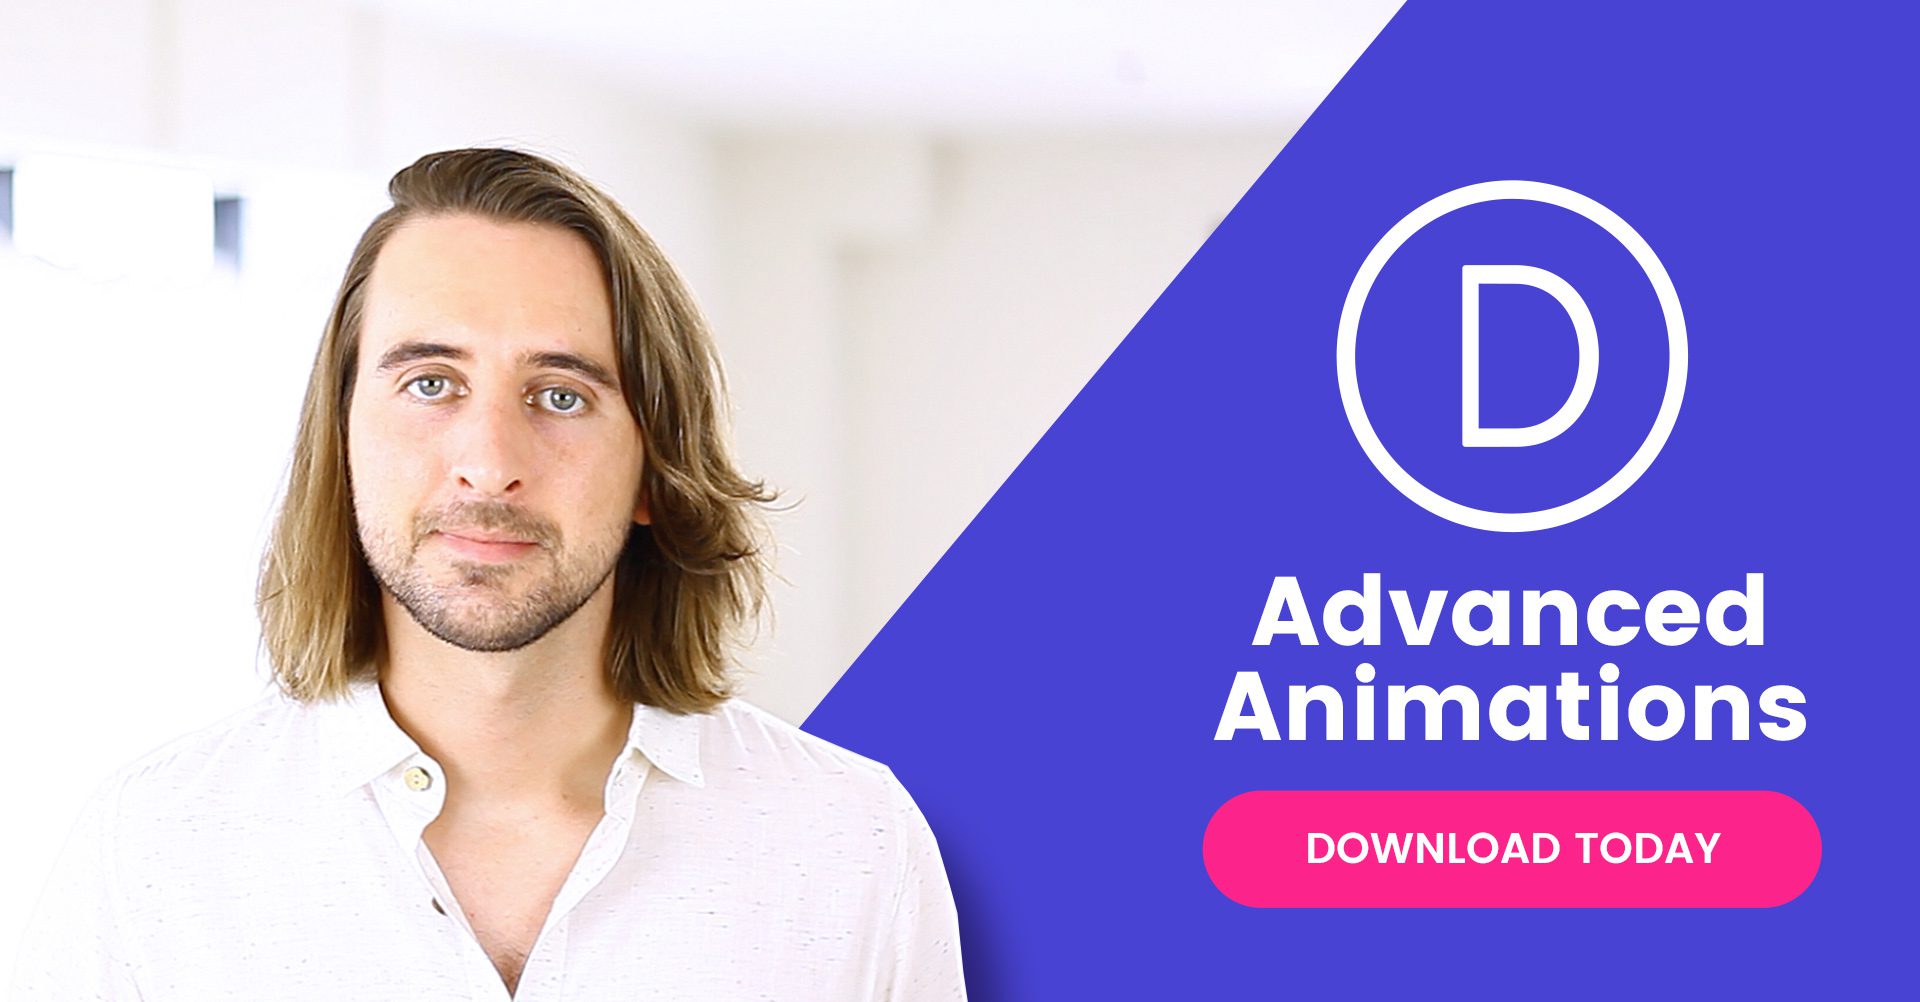 Divi Feature Update! Introducing Advanced Animations Options For All Divi Modules, Rows and Sections